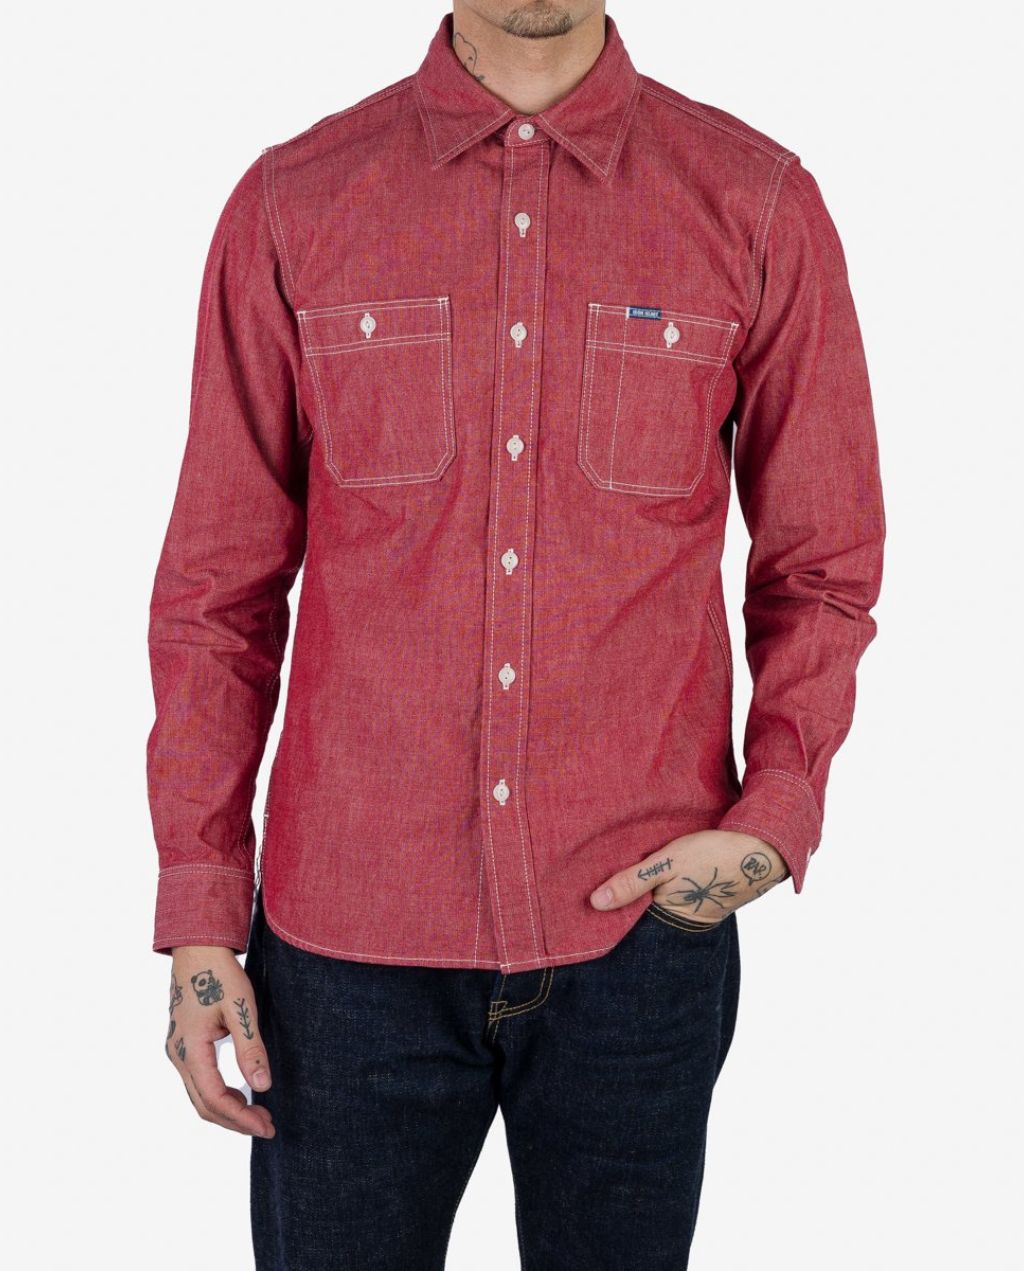 IHSH-363 red